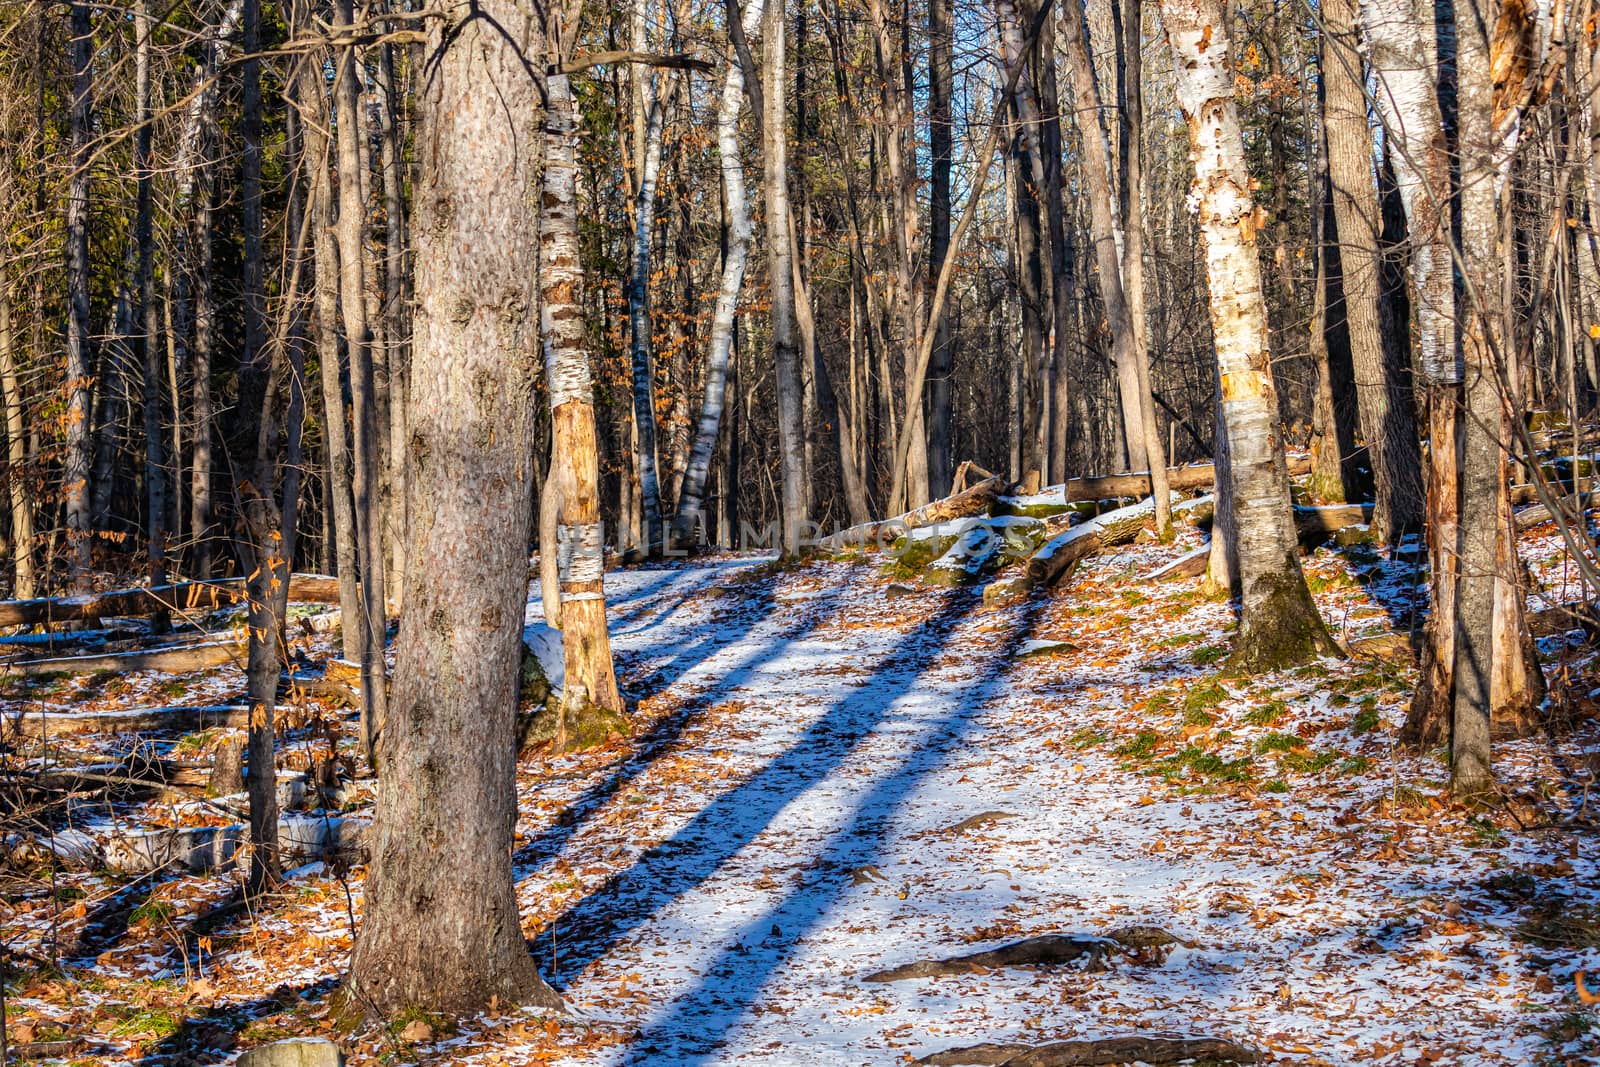 In early winter, a fresh dusting of snow puts a layer of white on the forest floor. Fallen autumn leaves and bare trees line the edges of a nature trail through the woods.